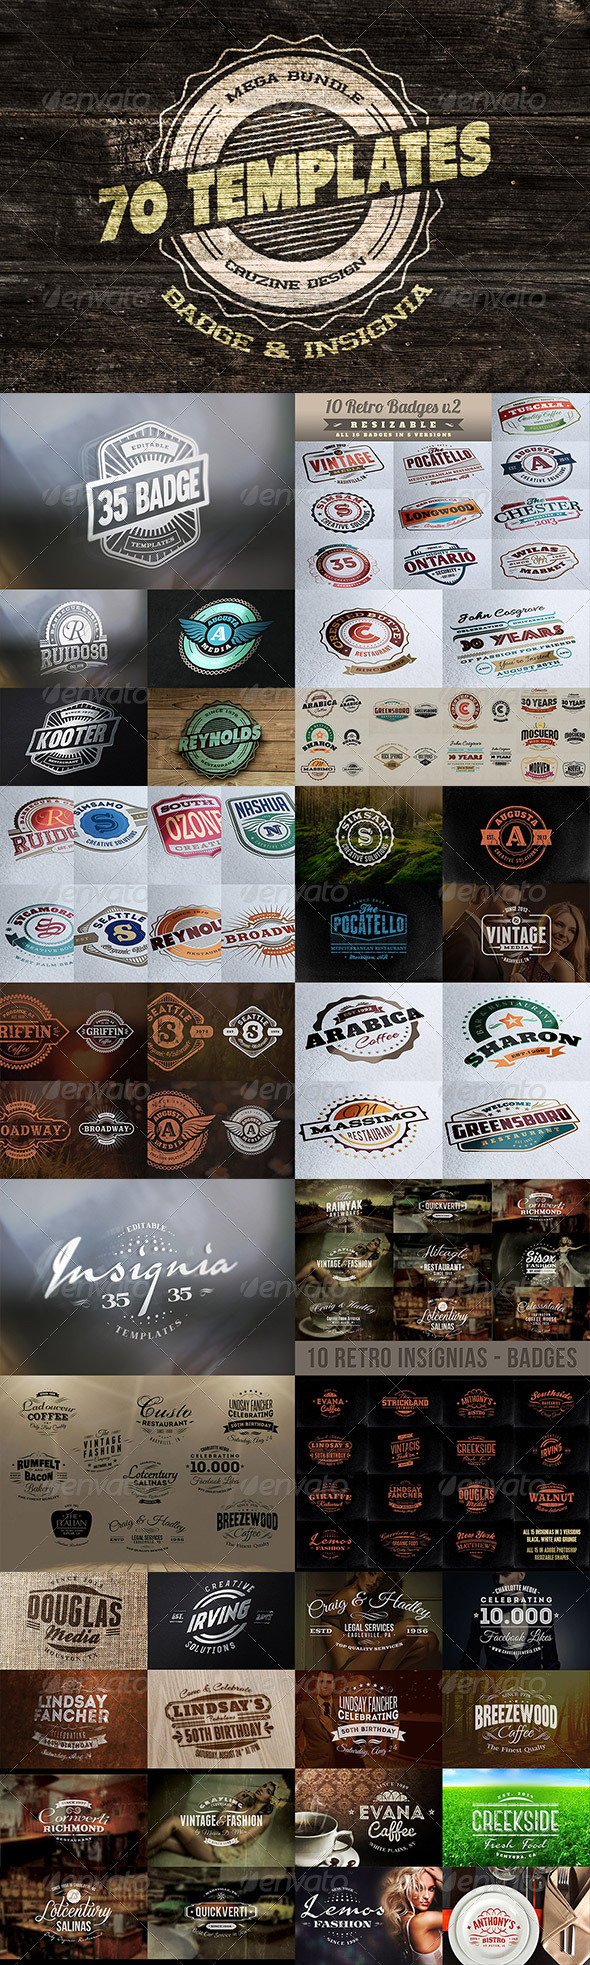 Graphics: Badge Banners Bundle Creative Deal Discount Element Elements Fonts Grunge Insignia Logos Ornament Ornaments Overlay Patterns Presentation Resizable Retro Sale Shape Sign Sticker Template Templates Typography Unique Vector Vintage